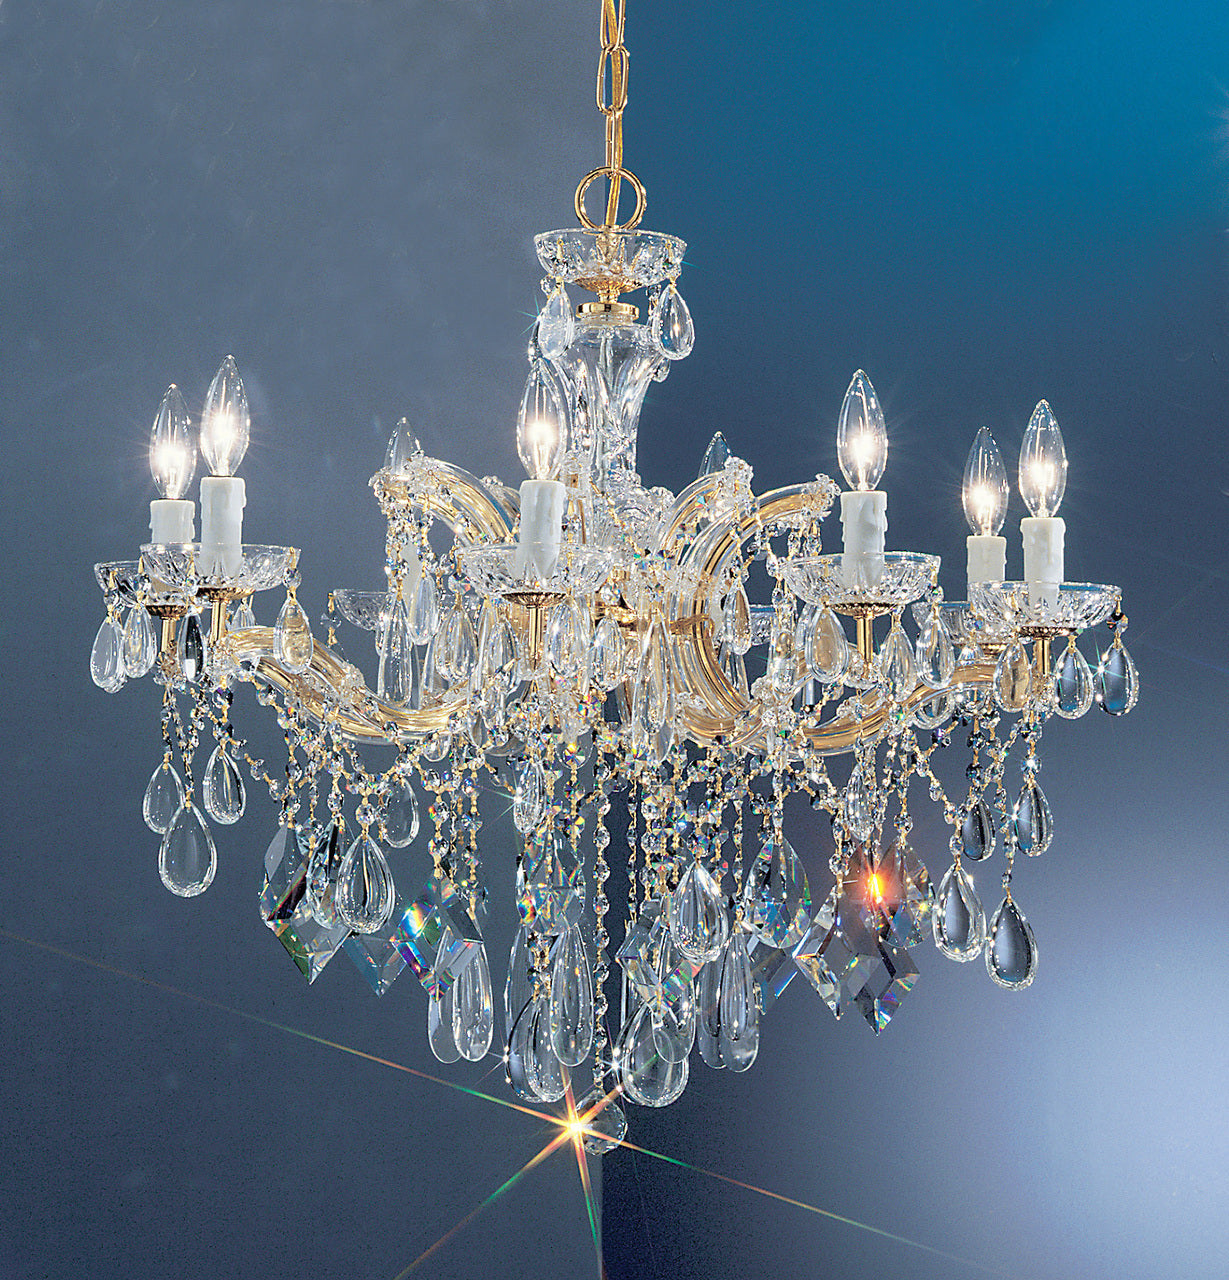 Classic Lighting 8358 GP C Rialto Contemporary Crystal Chandelier in Gold